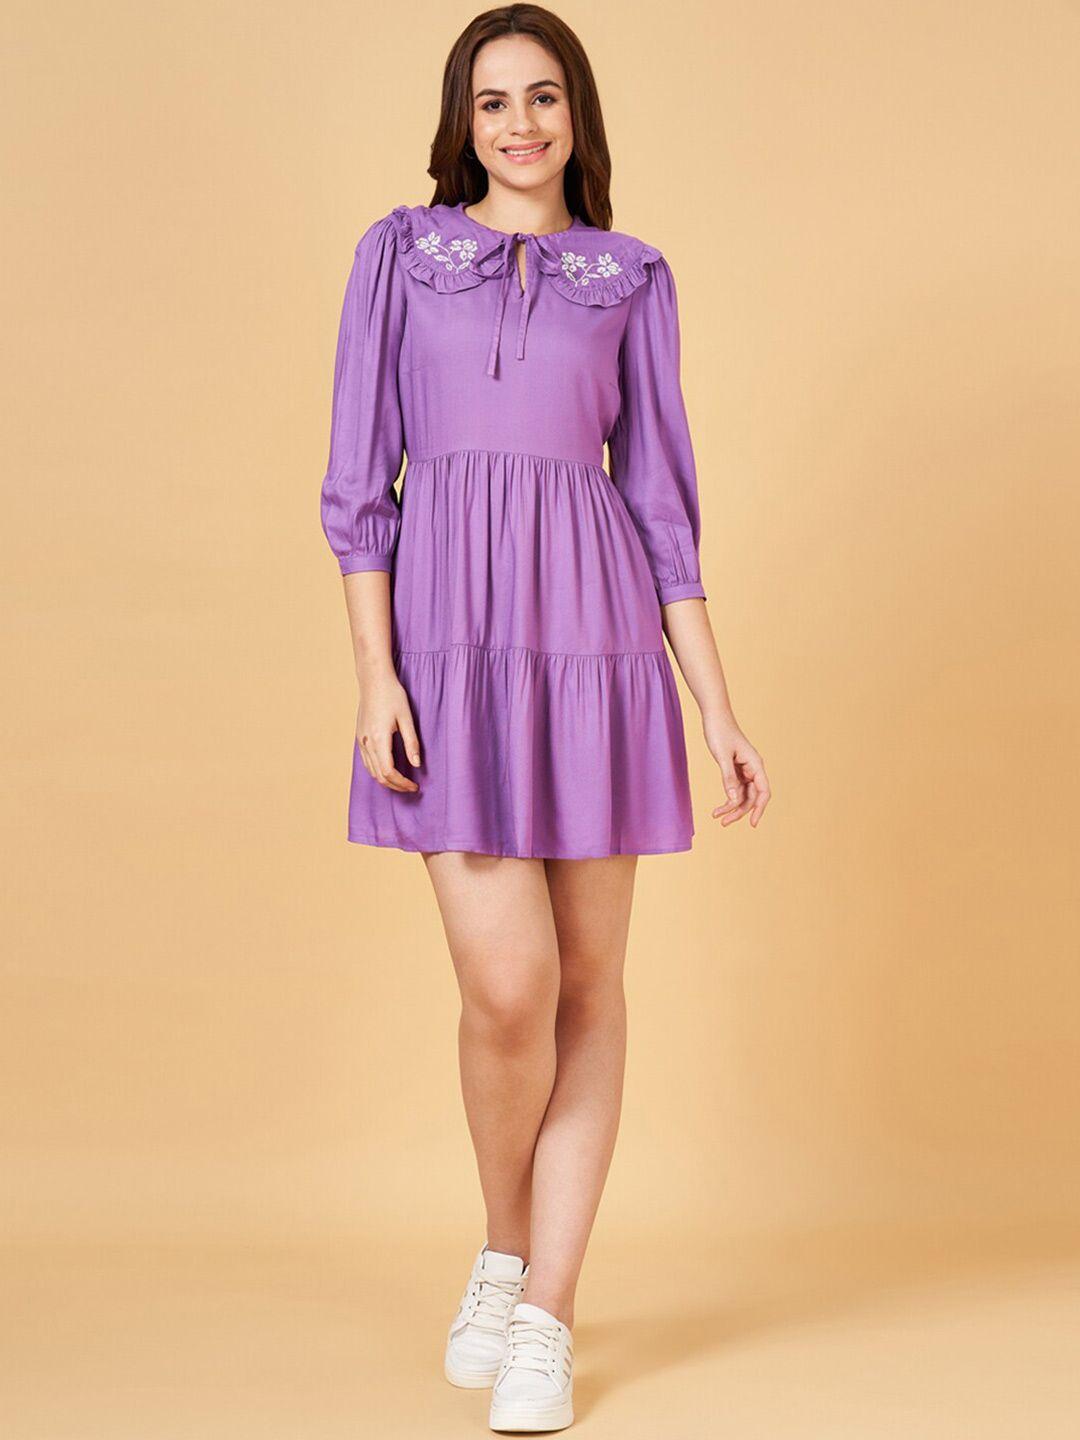 Honey by Pantaloons Peter Pan Collar Puff Sleeves Ruffled Tiered Fit & Flare Dress